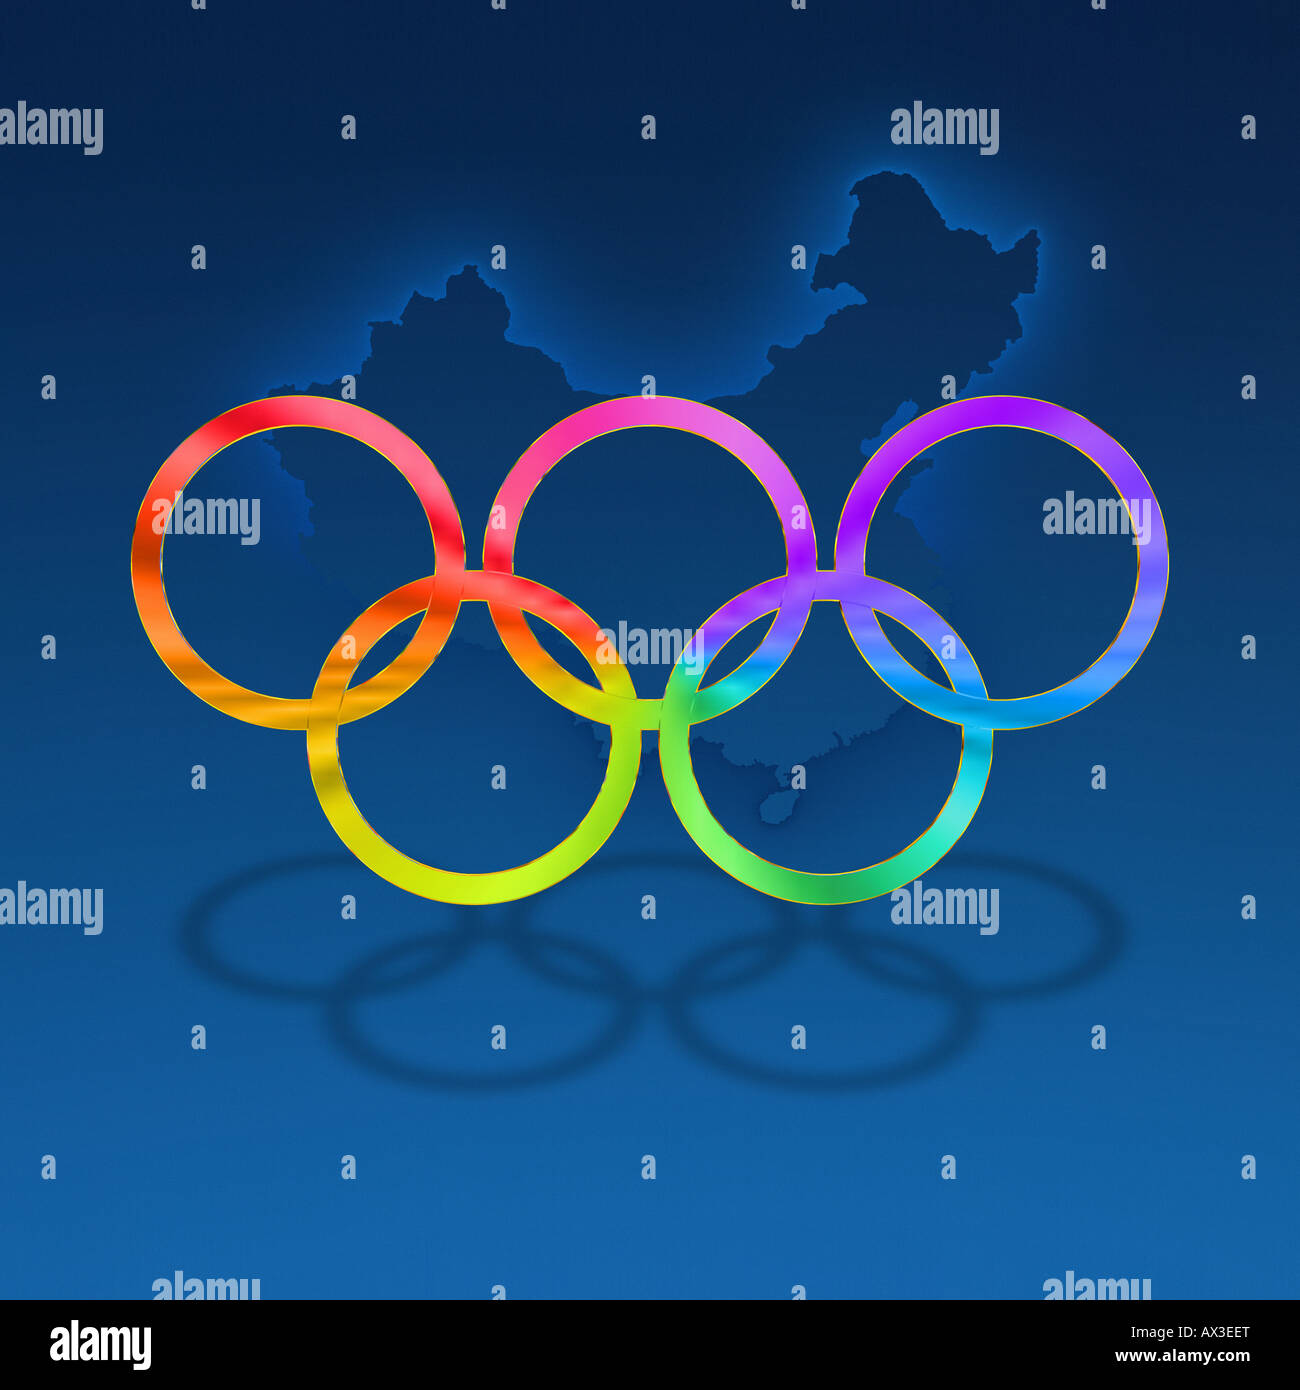 Olympic rings in bright colors against a nice blue gradated background including subtle outline of China Stock Photo